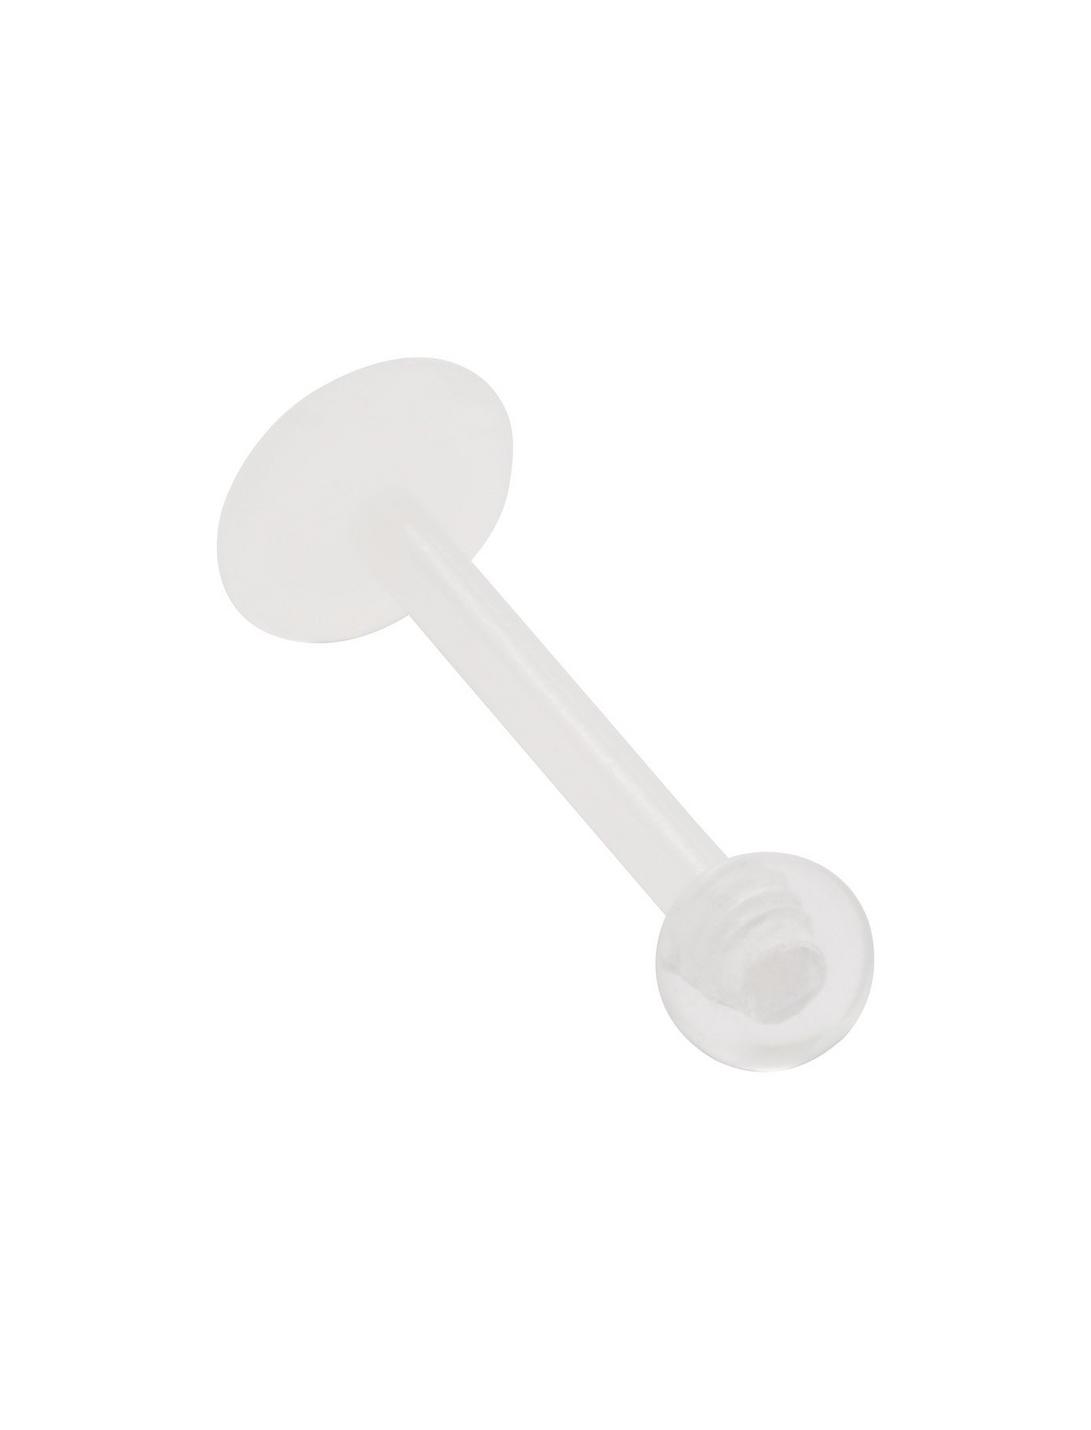 16G 3/8 Acrylic White Clear Ball Labret Stud, CLEAR, hi-res